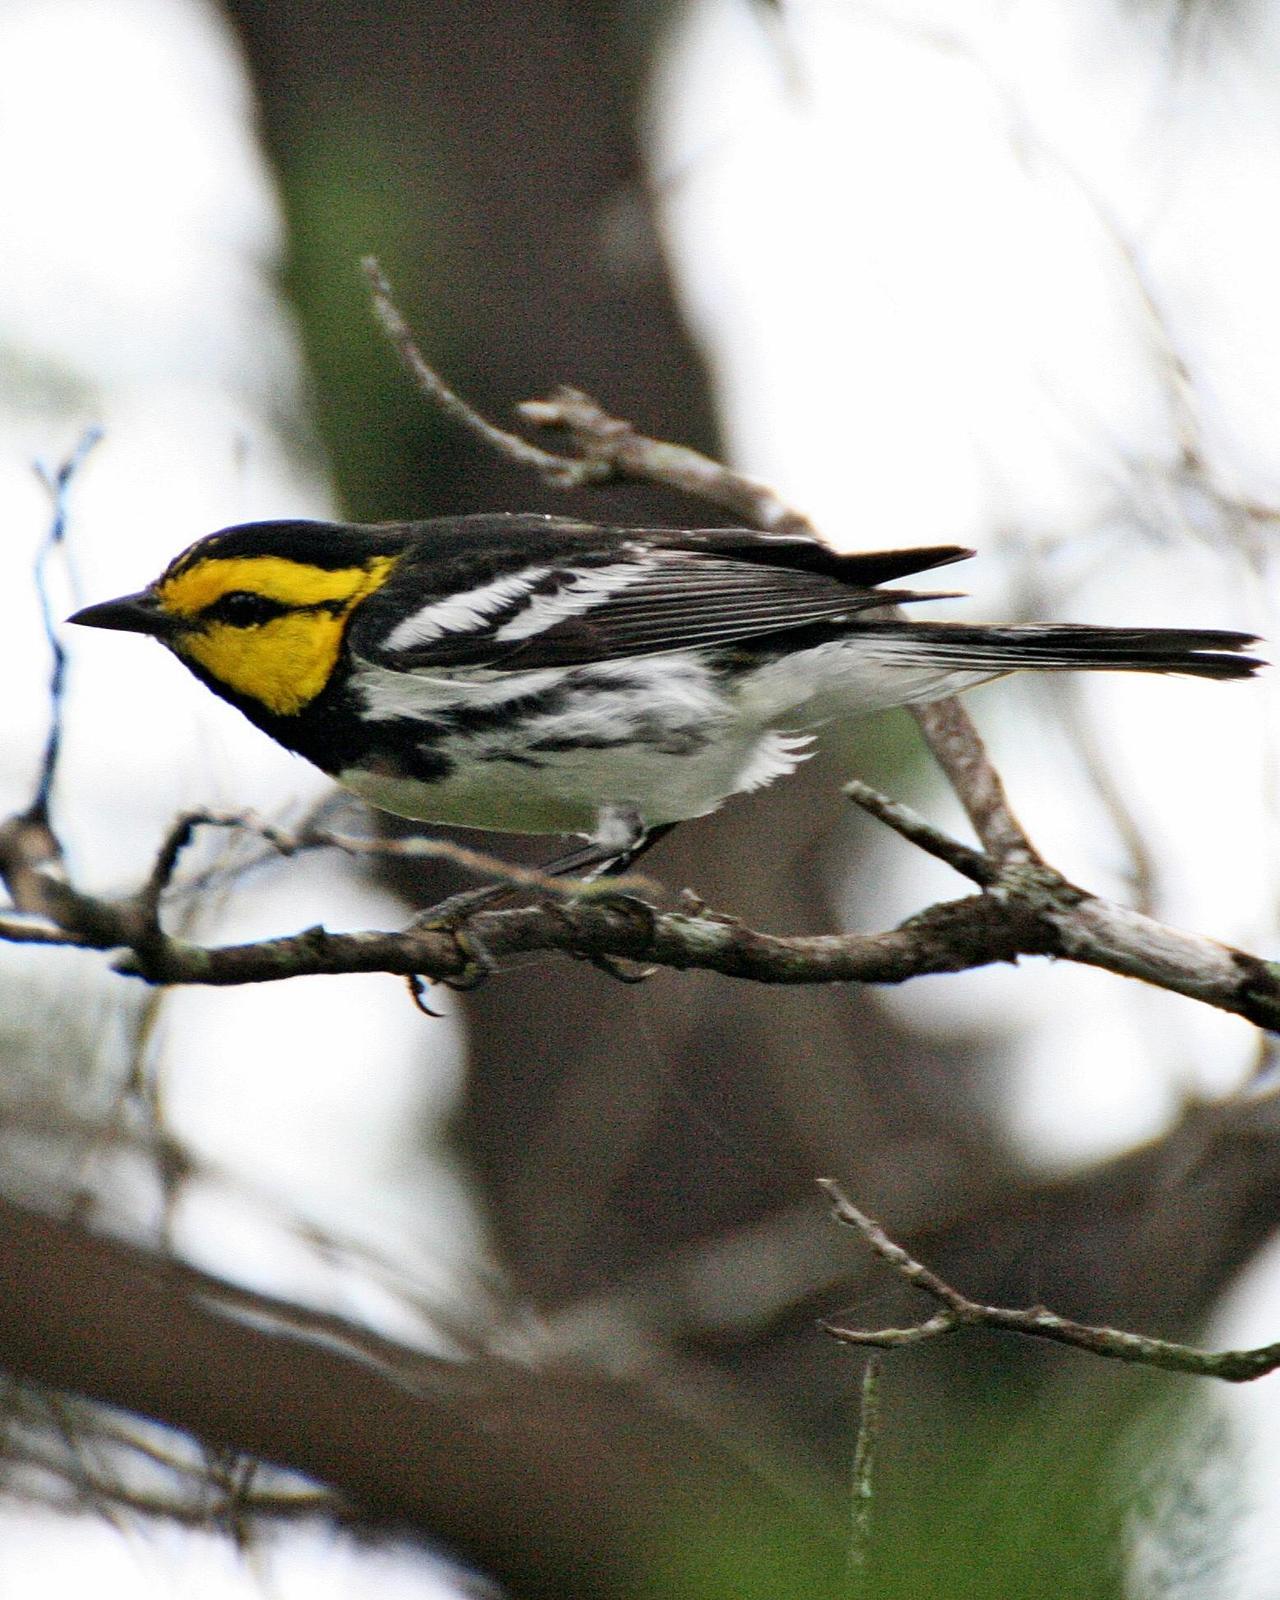 Golden-cheeked Warbler Photo by Andrew Theus